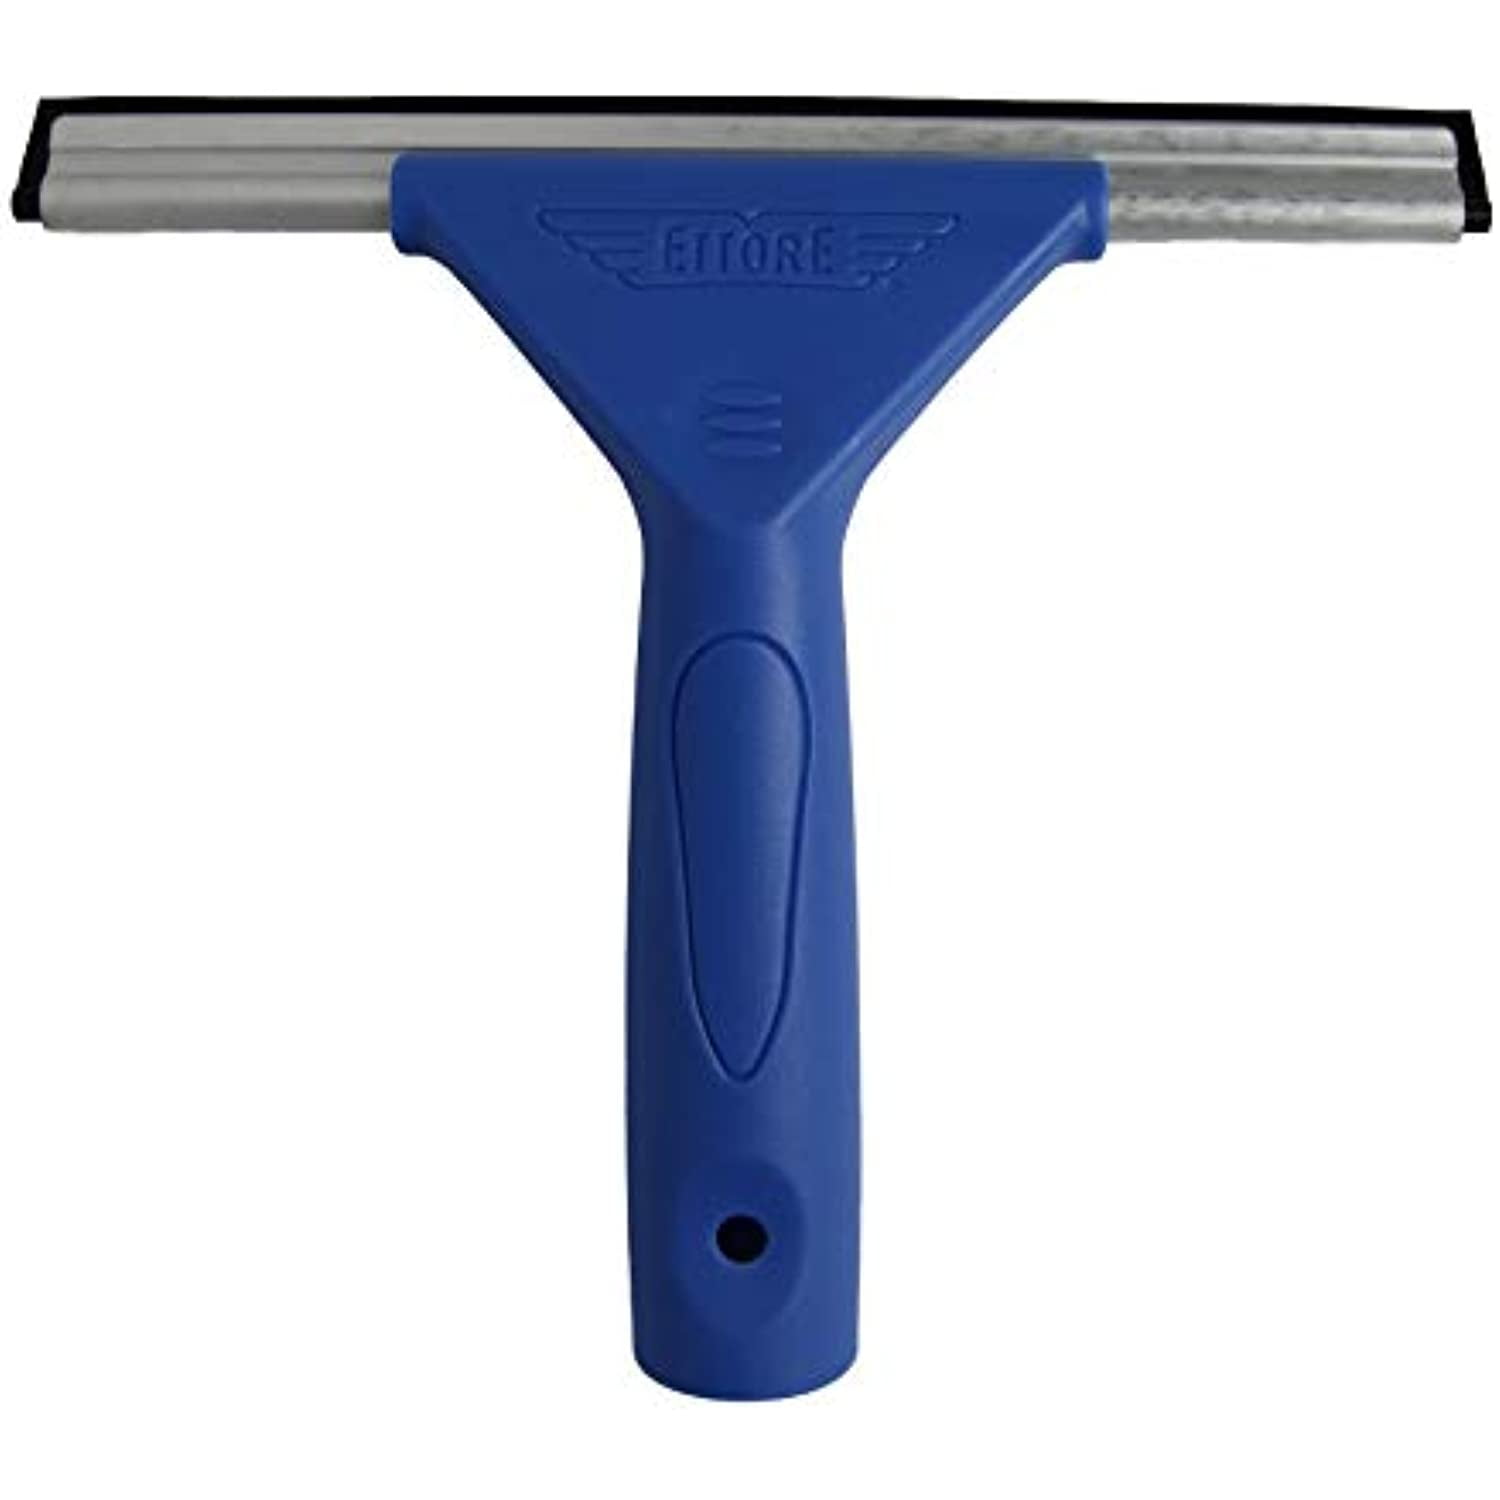 Aliso Viejo Blind Cleaning - Squeegee Pro